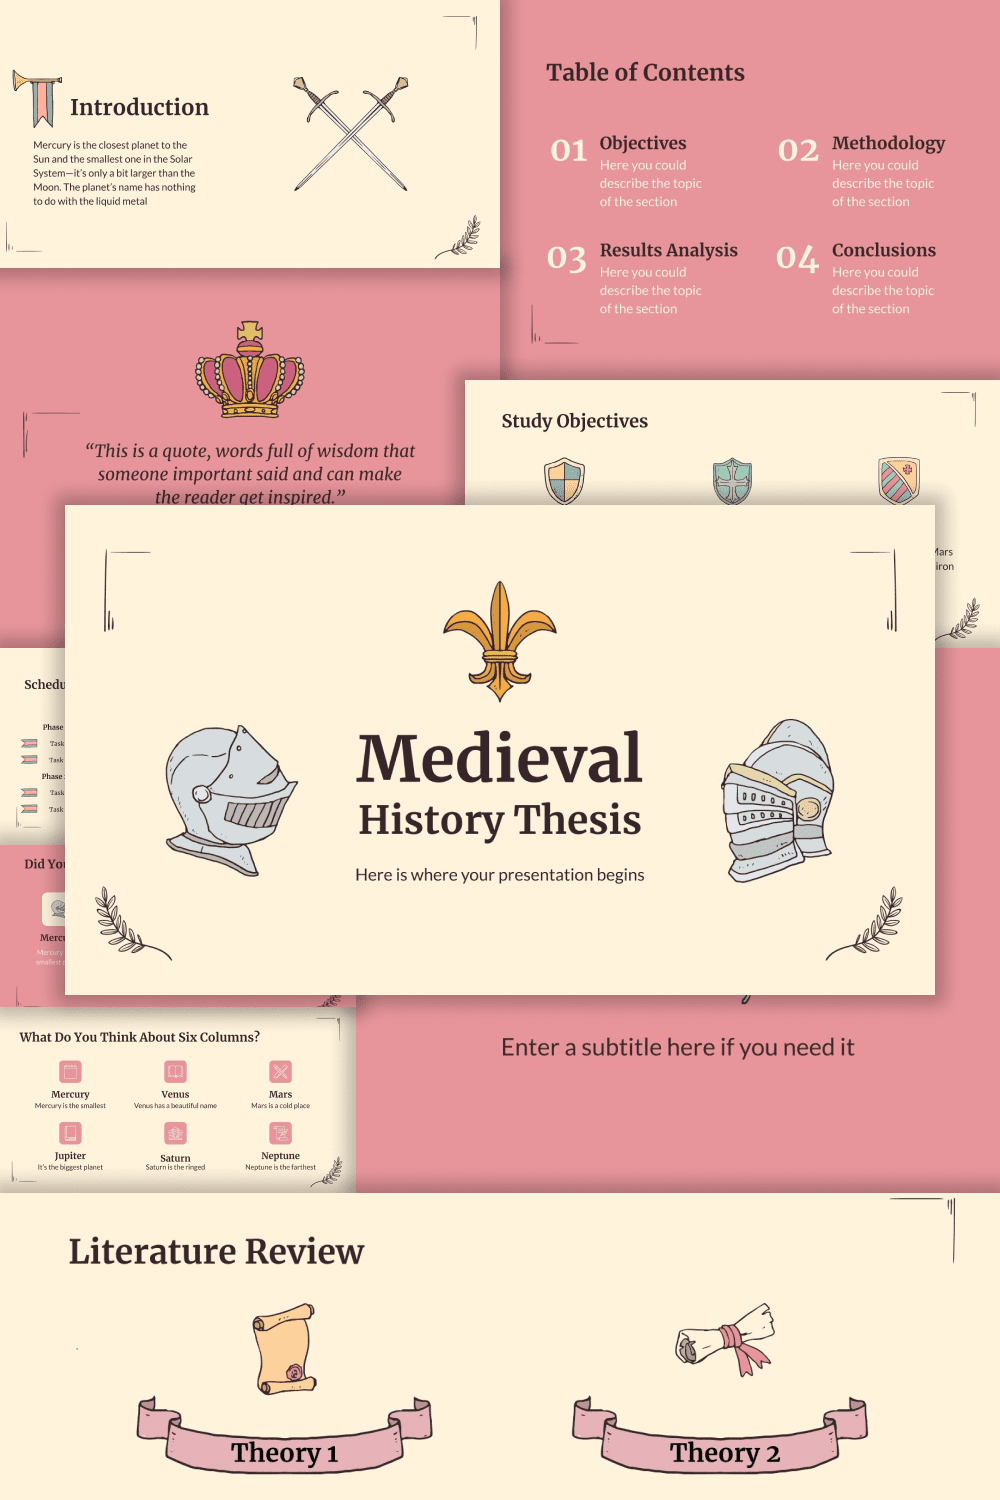 Screenshots of the presentation with pictures of scrolls, knightly armor on yellow and pink backgrounds.